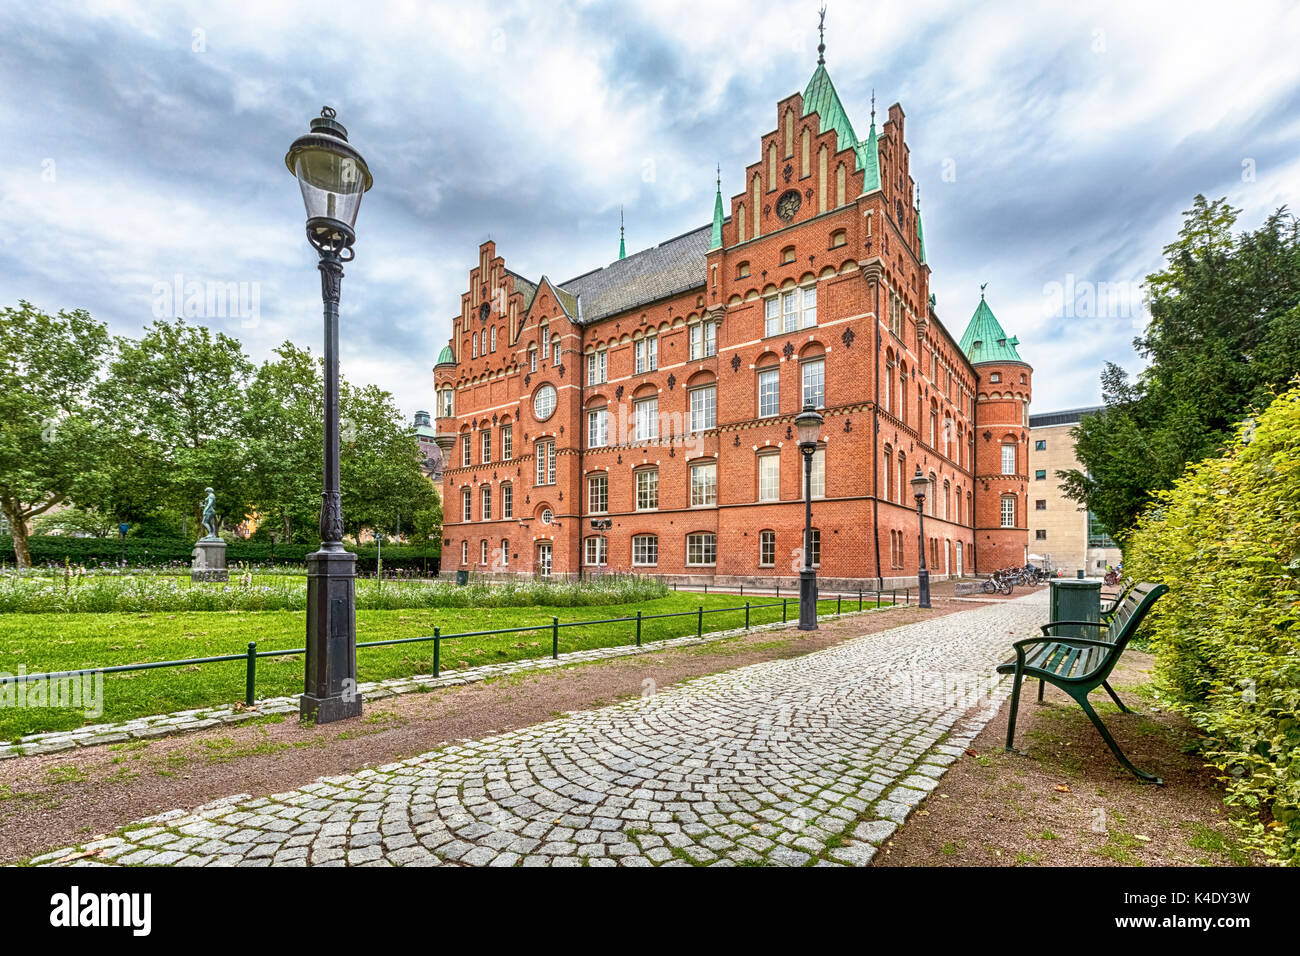 Building of city library in Malmo, Sweden made of red brick in renaissance architecture style Stock Photo